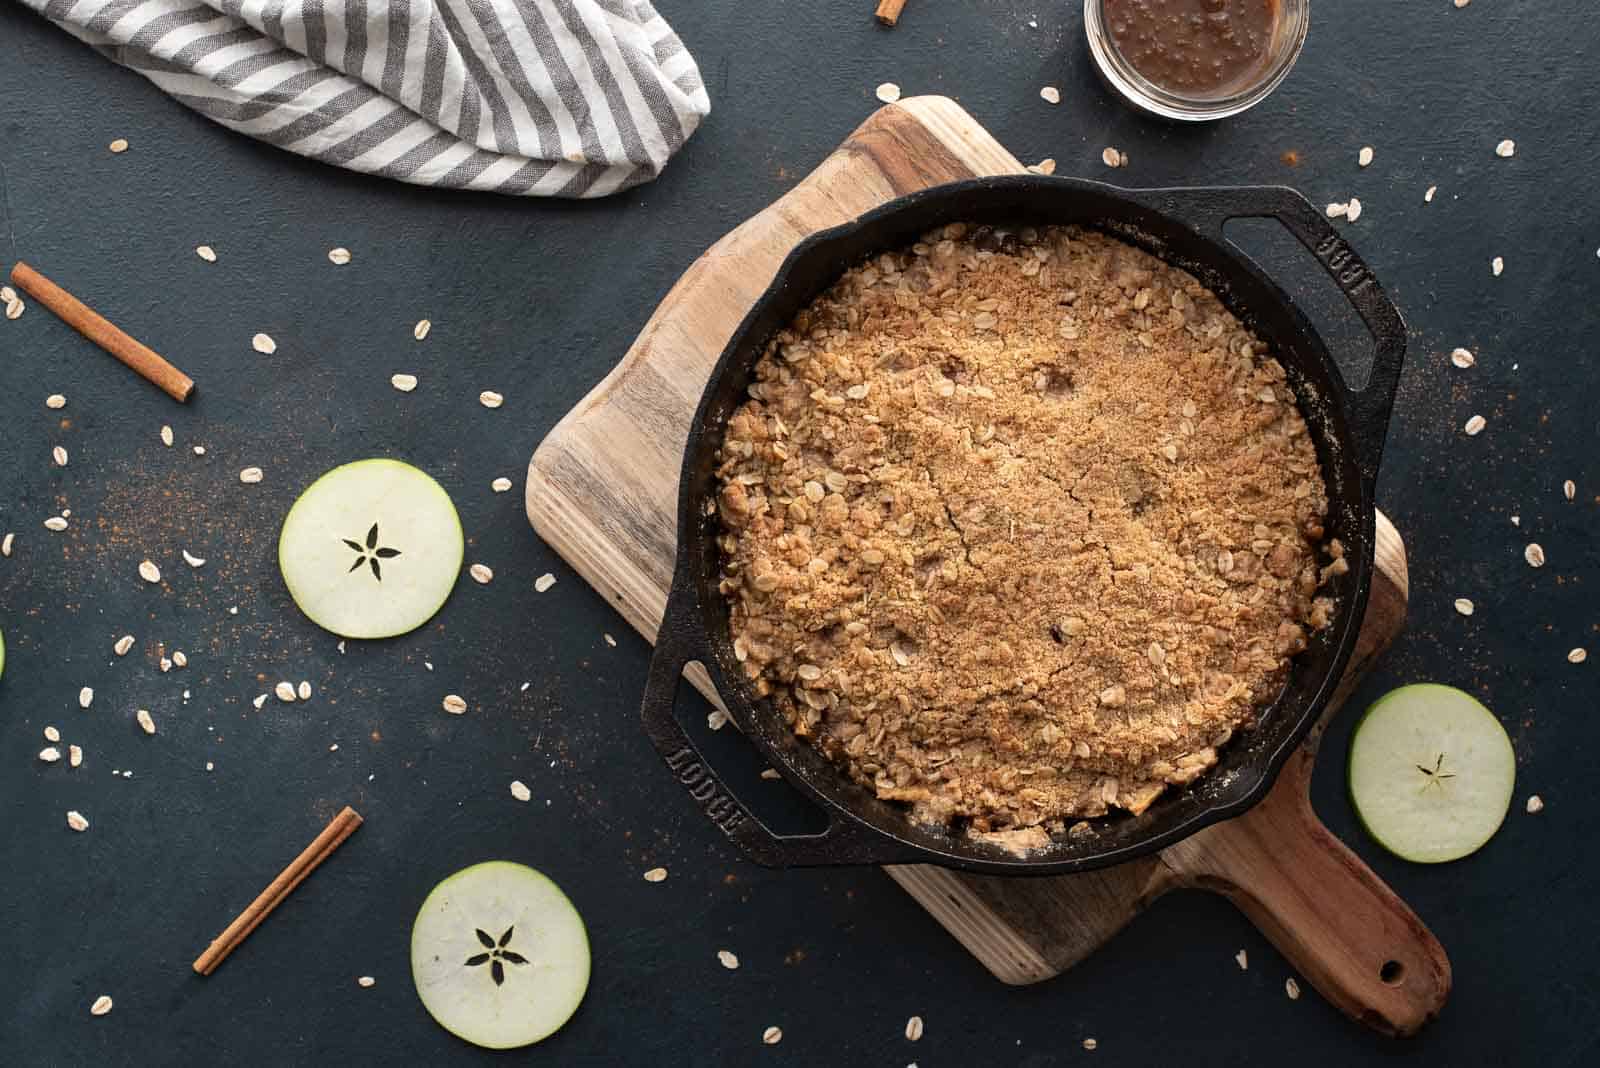 A butterscotch apple crumble in a cast iron skillet on a wooden cutting board.